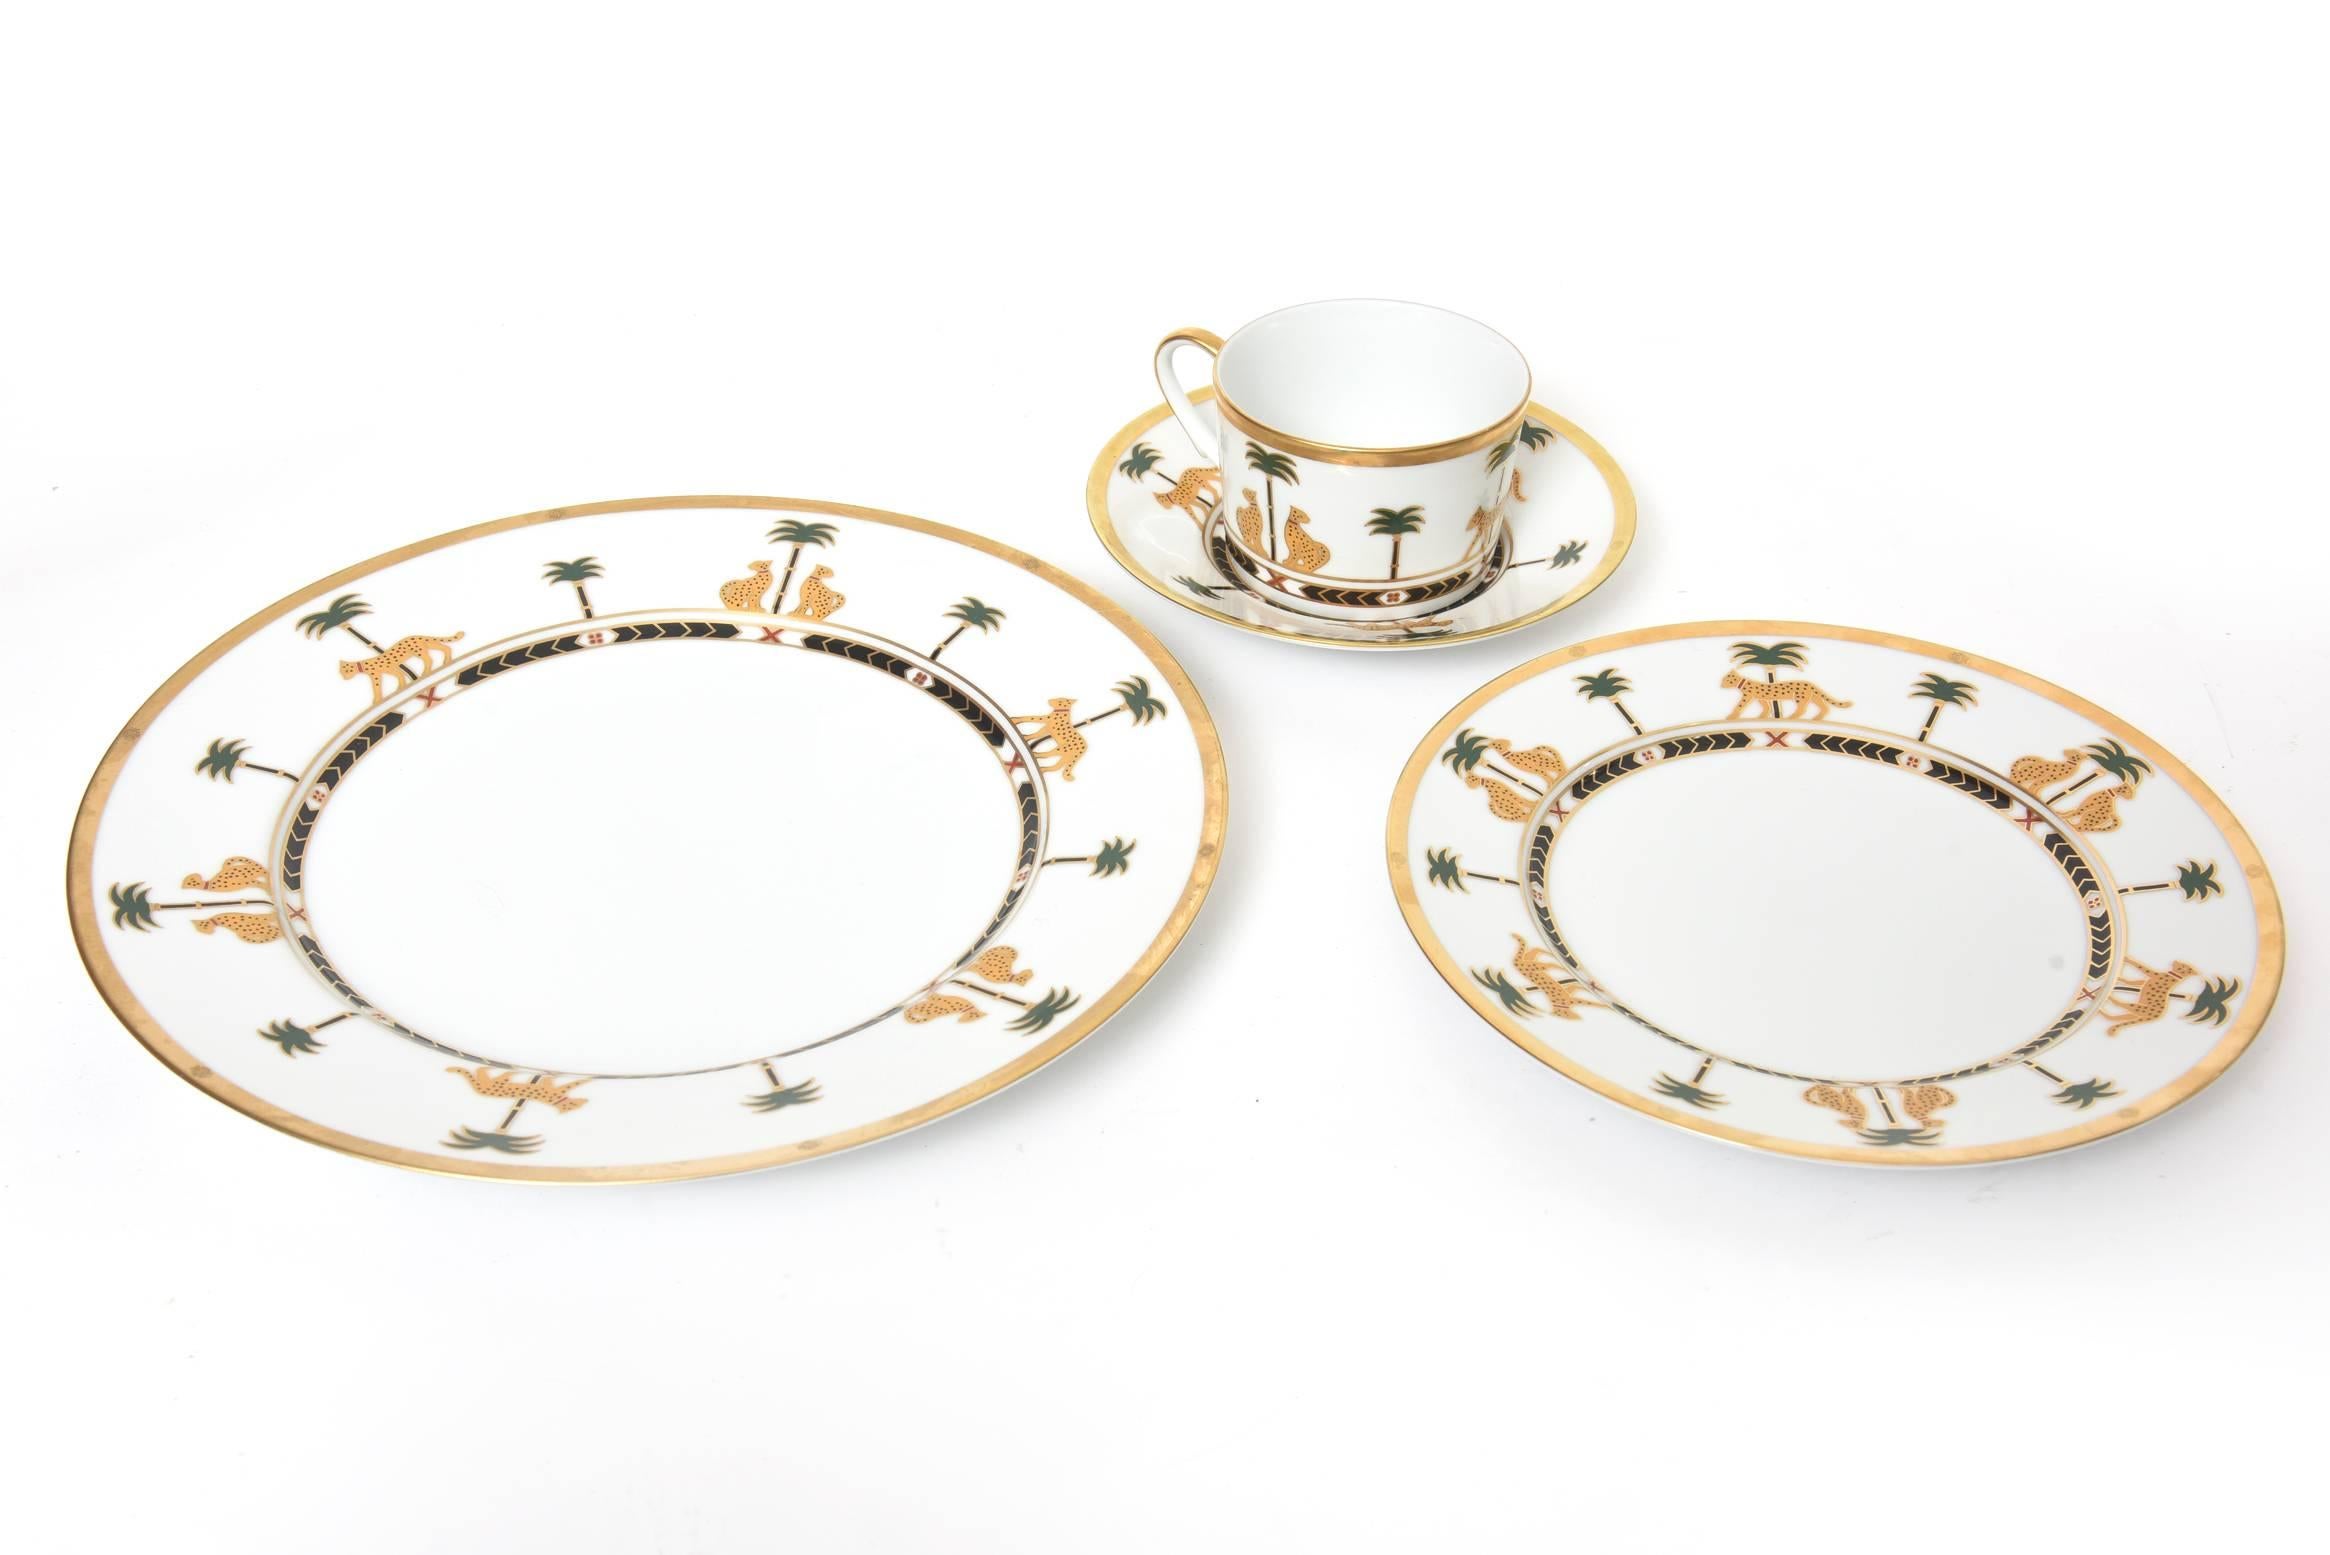 Casablanca by Christian Dior was manufactured from 1991-1999. The pattern has been discontinued. The design features leopards and palm trees on a elegant white china. 

Includes:
Dinner plate 10 7/8